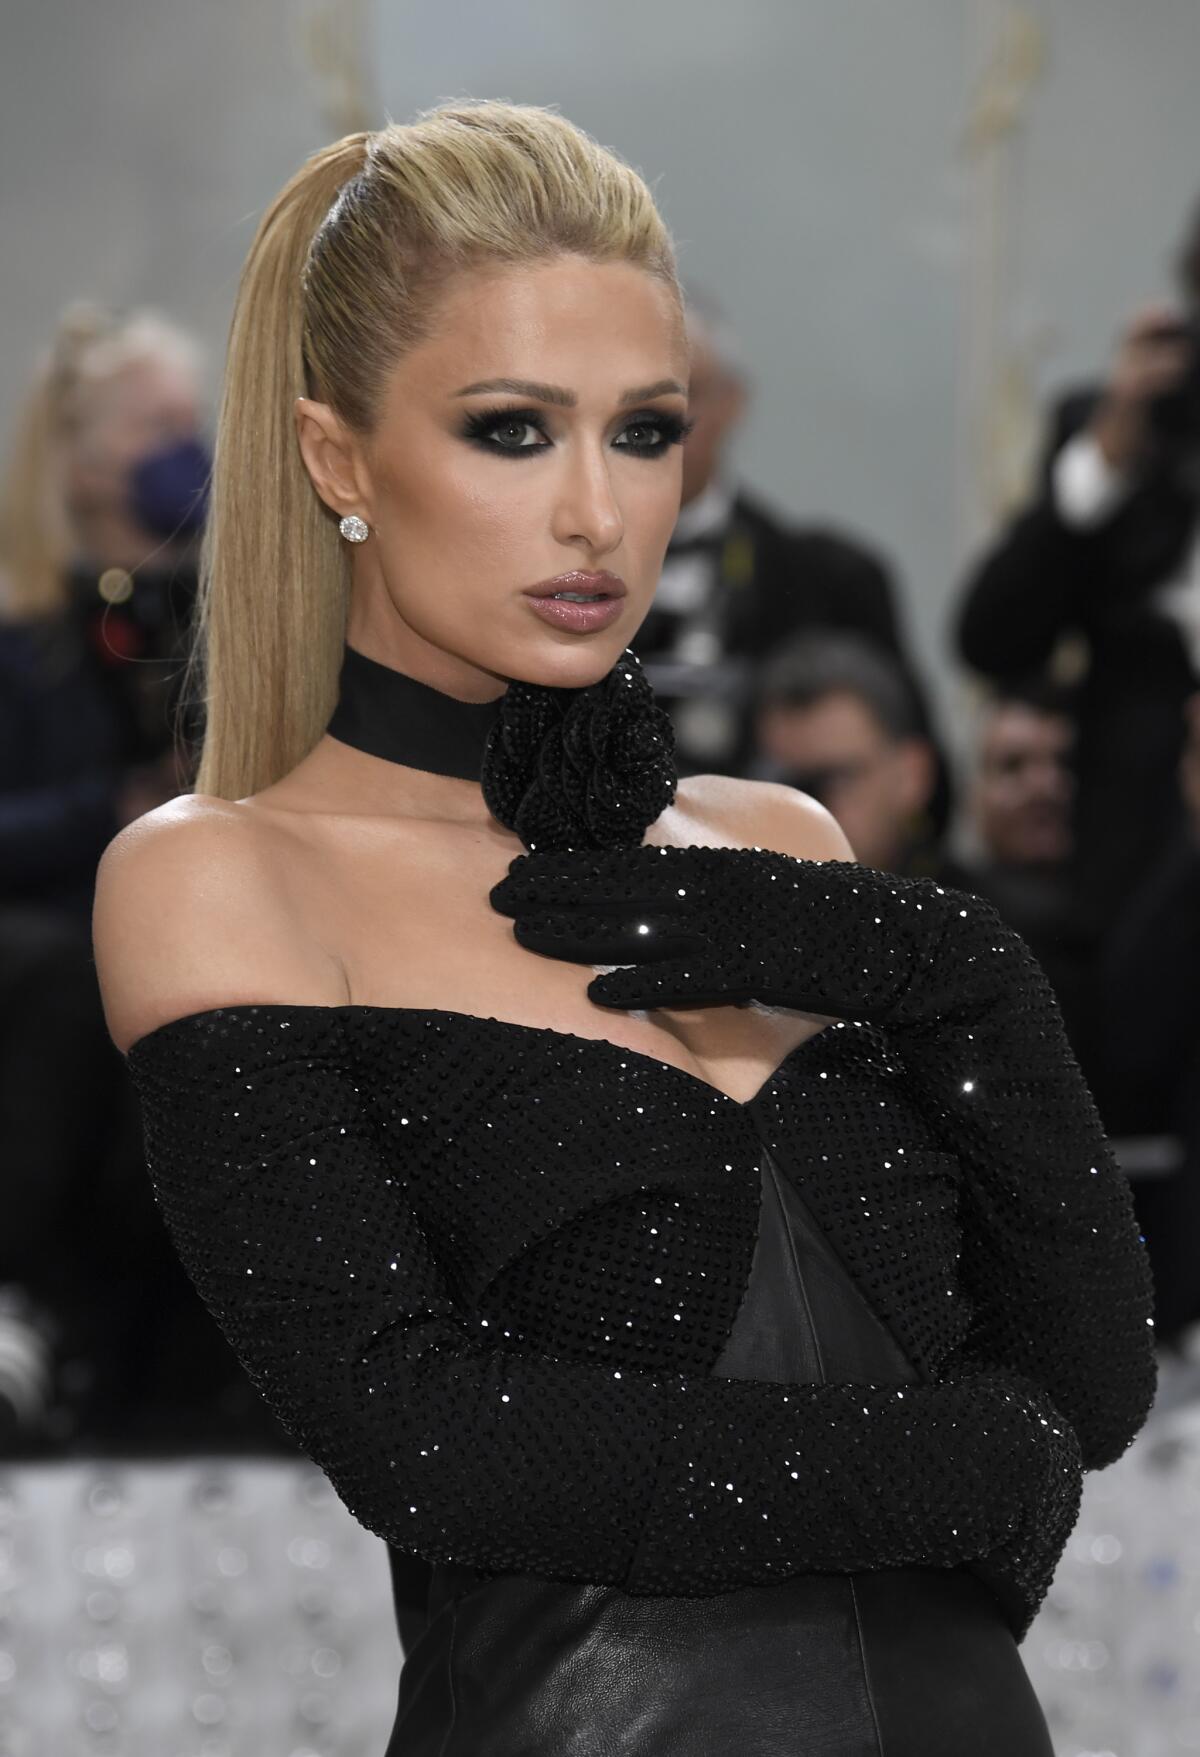 Paris Hilton attends the Met Gala in a strapless black gown, holding one gloved hand to her chest